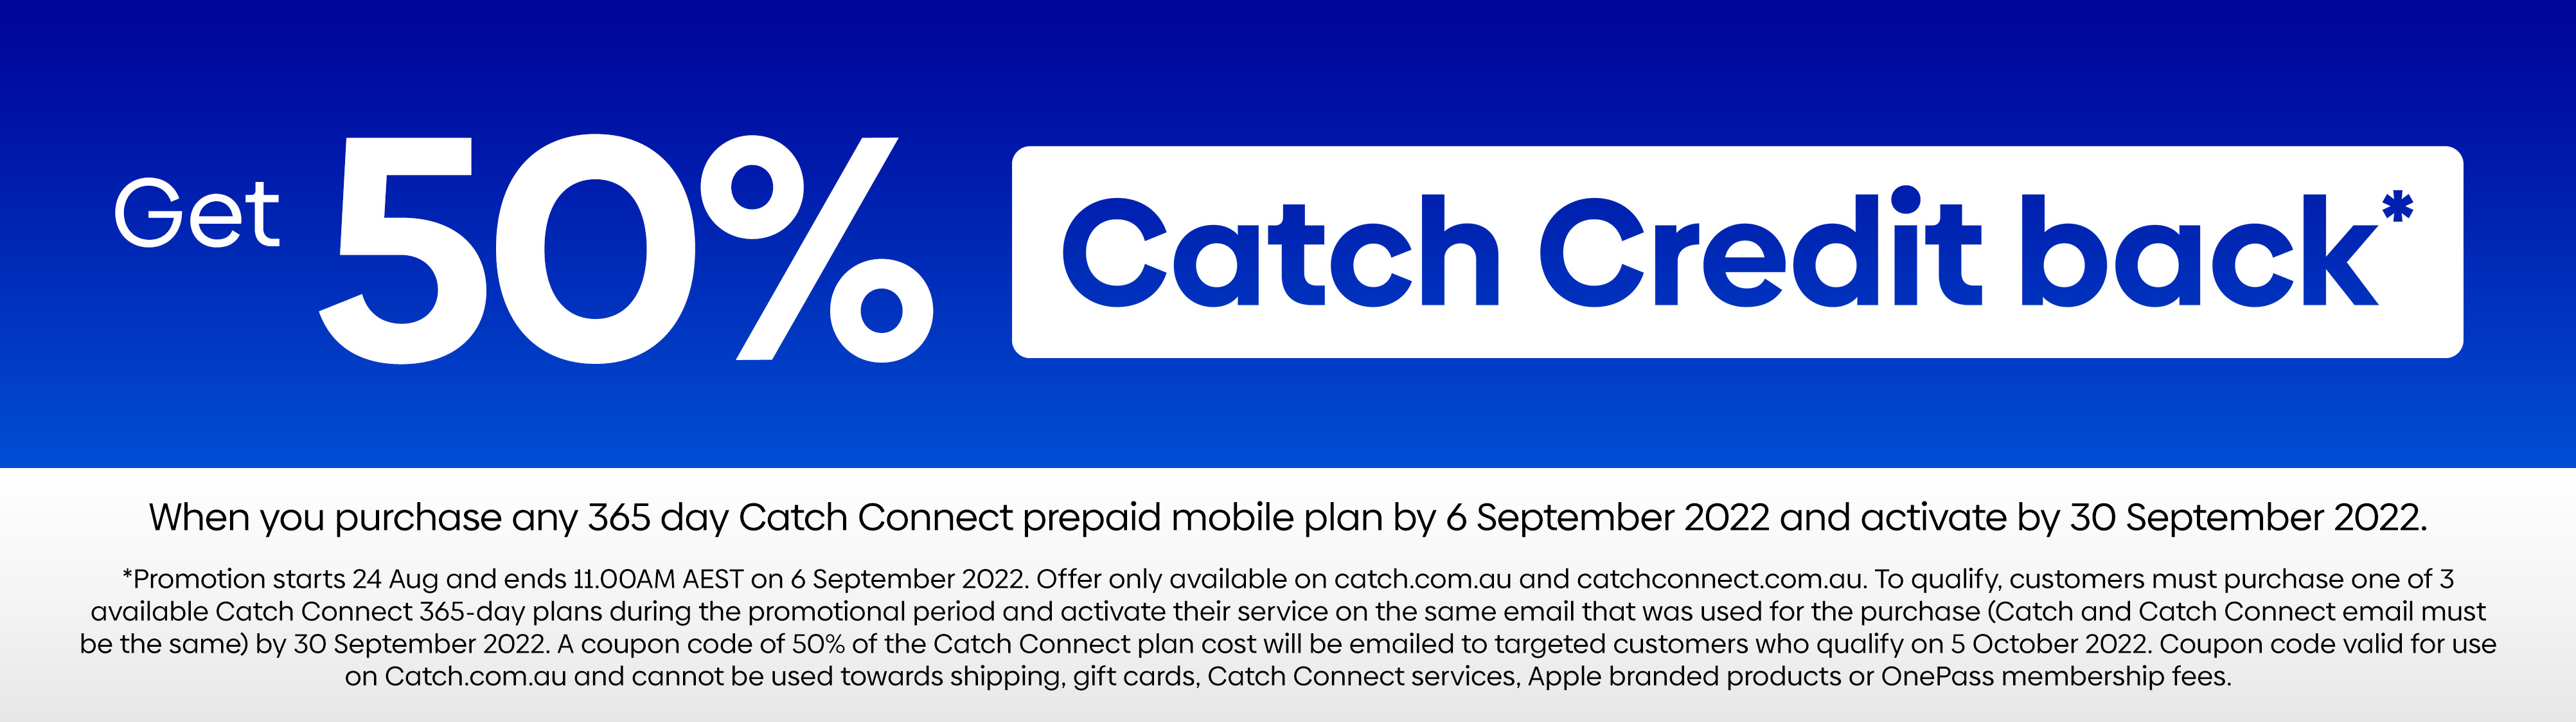 50% OFF Catch Credit back when you purchase any 365 day Catch Connect prepaid mobile plan